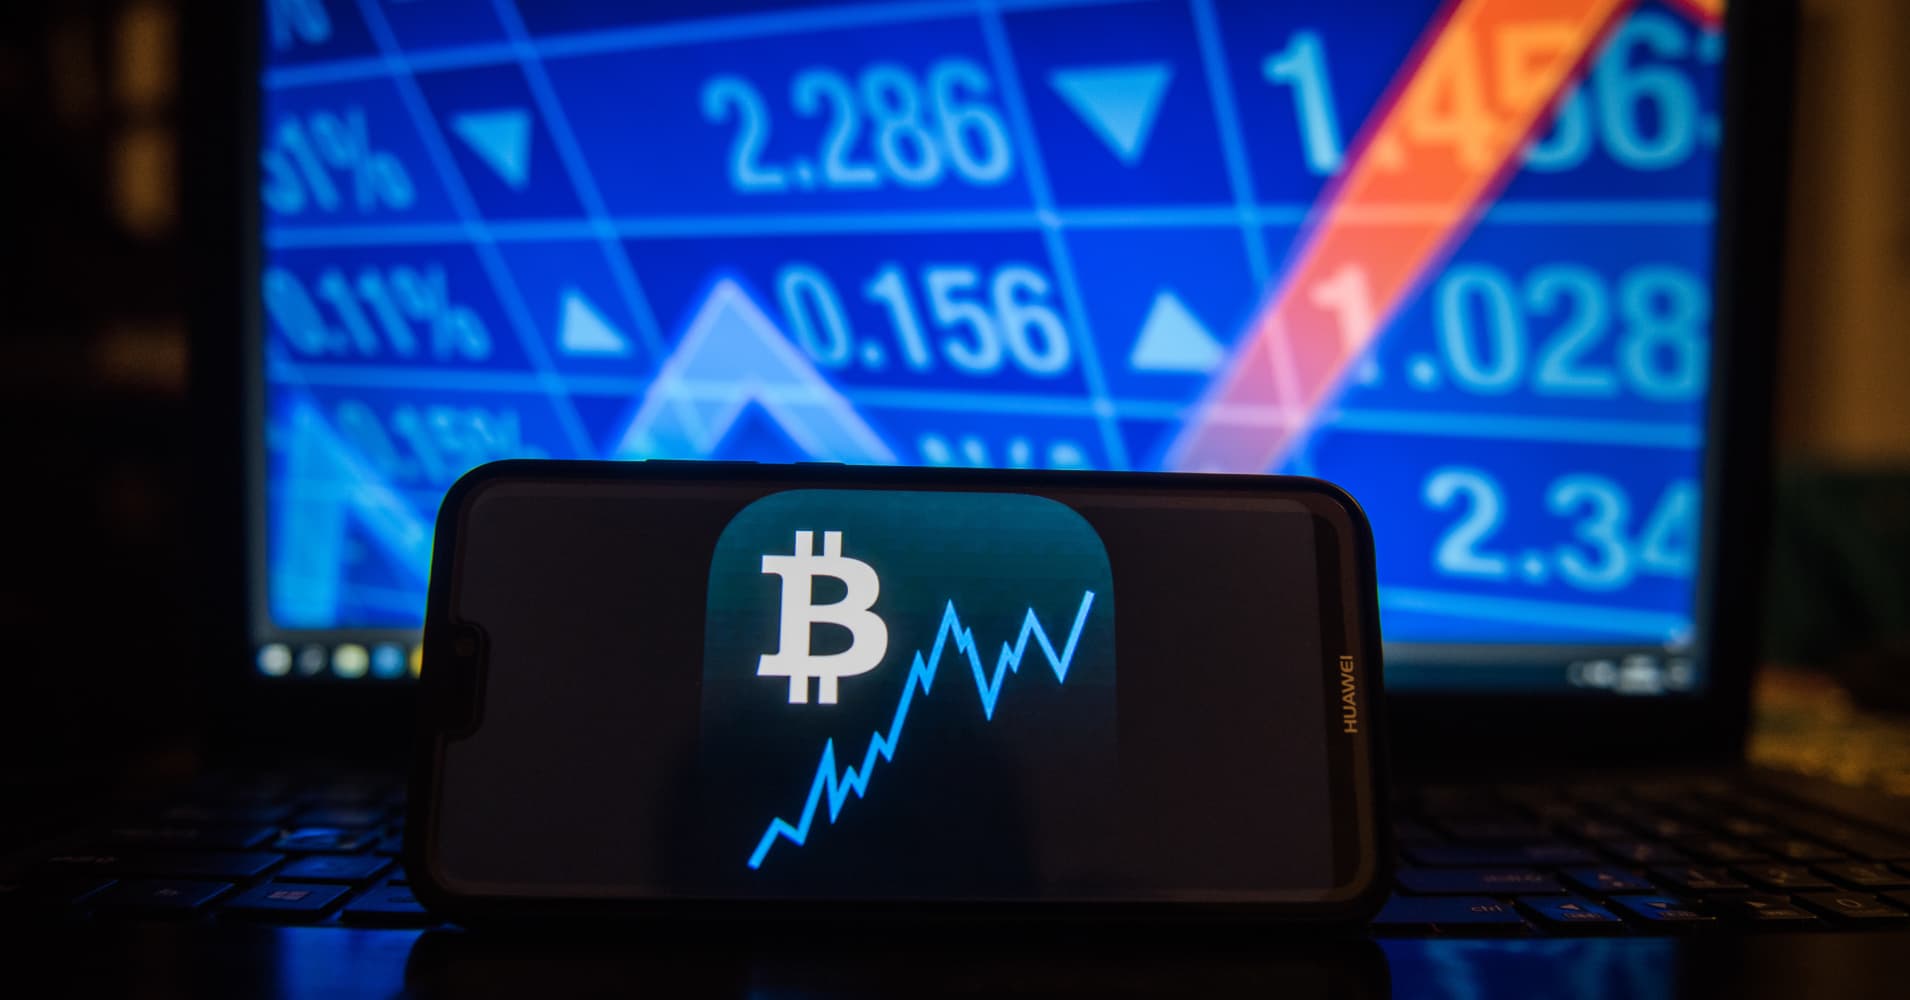 Bitcoin fights back, but struggles to stay above $4,000